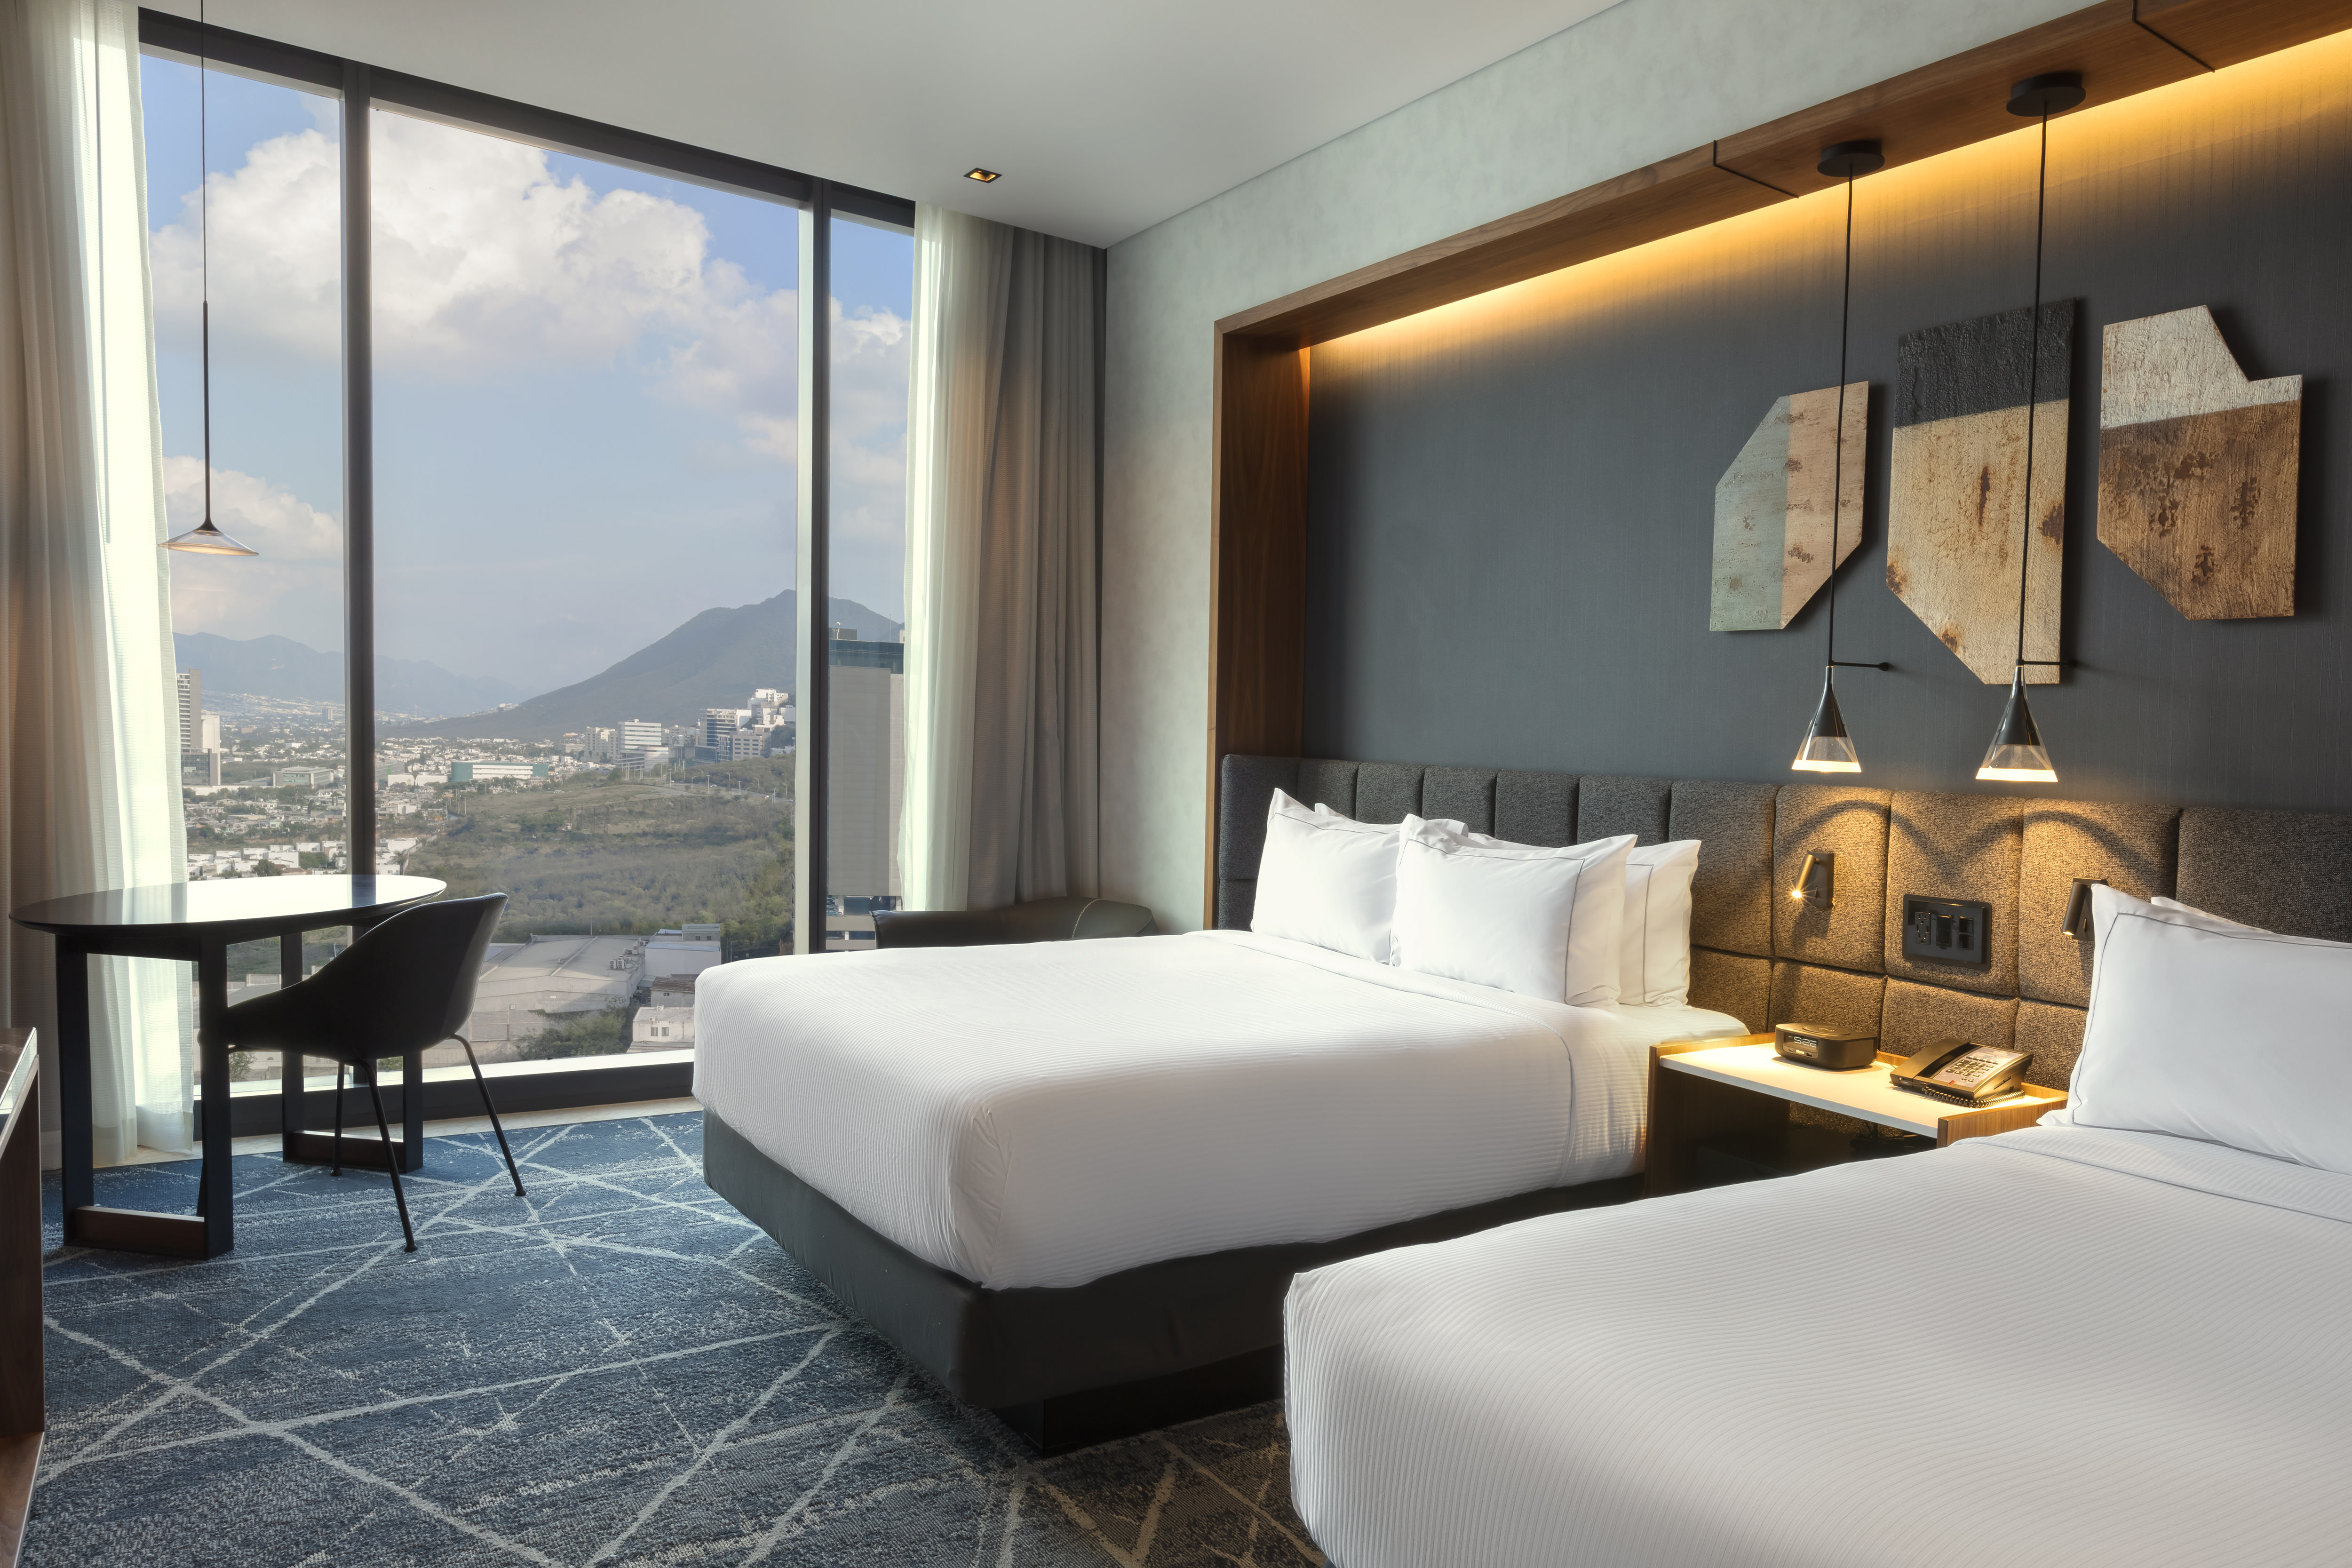 Guest room with two queen-sized beds and floor-to-ceiling windows with views of mountains and city